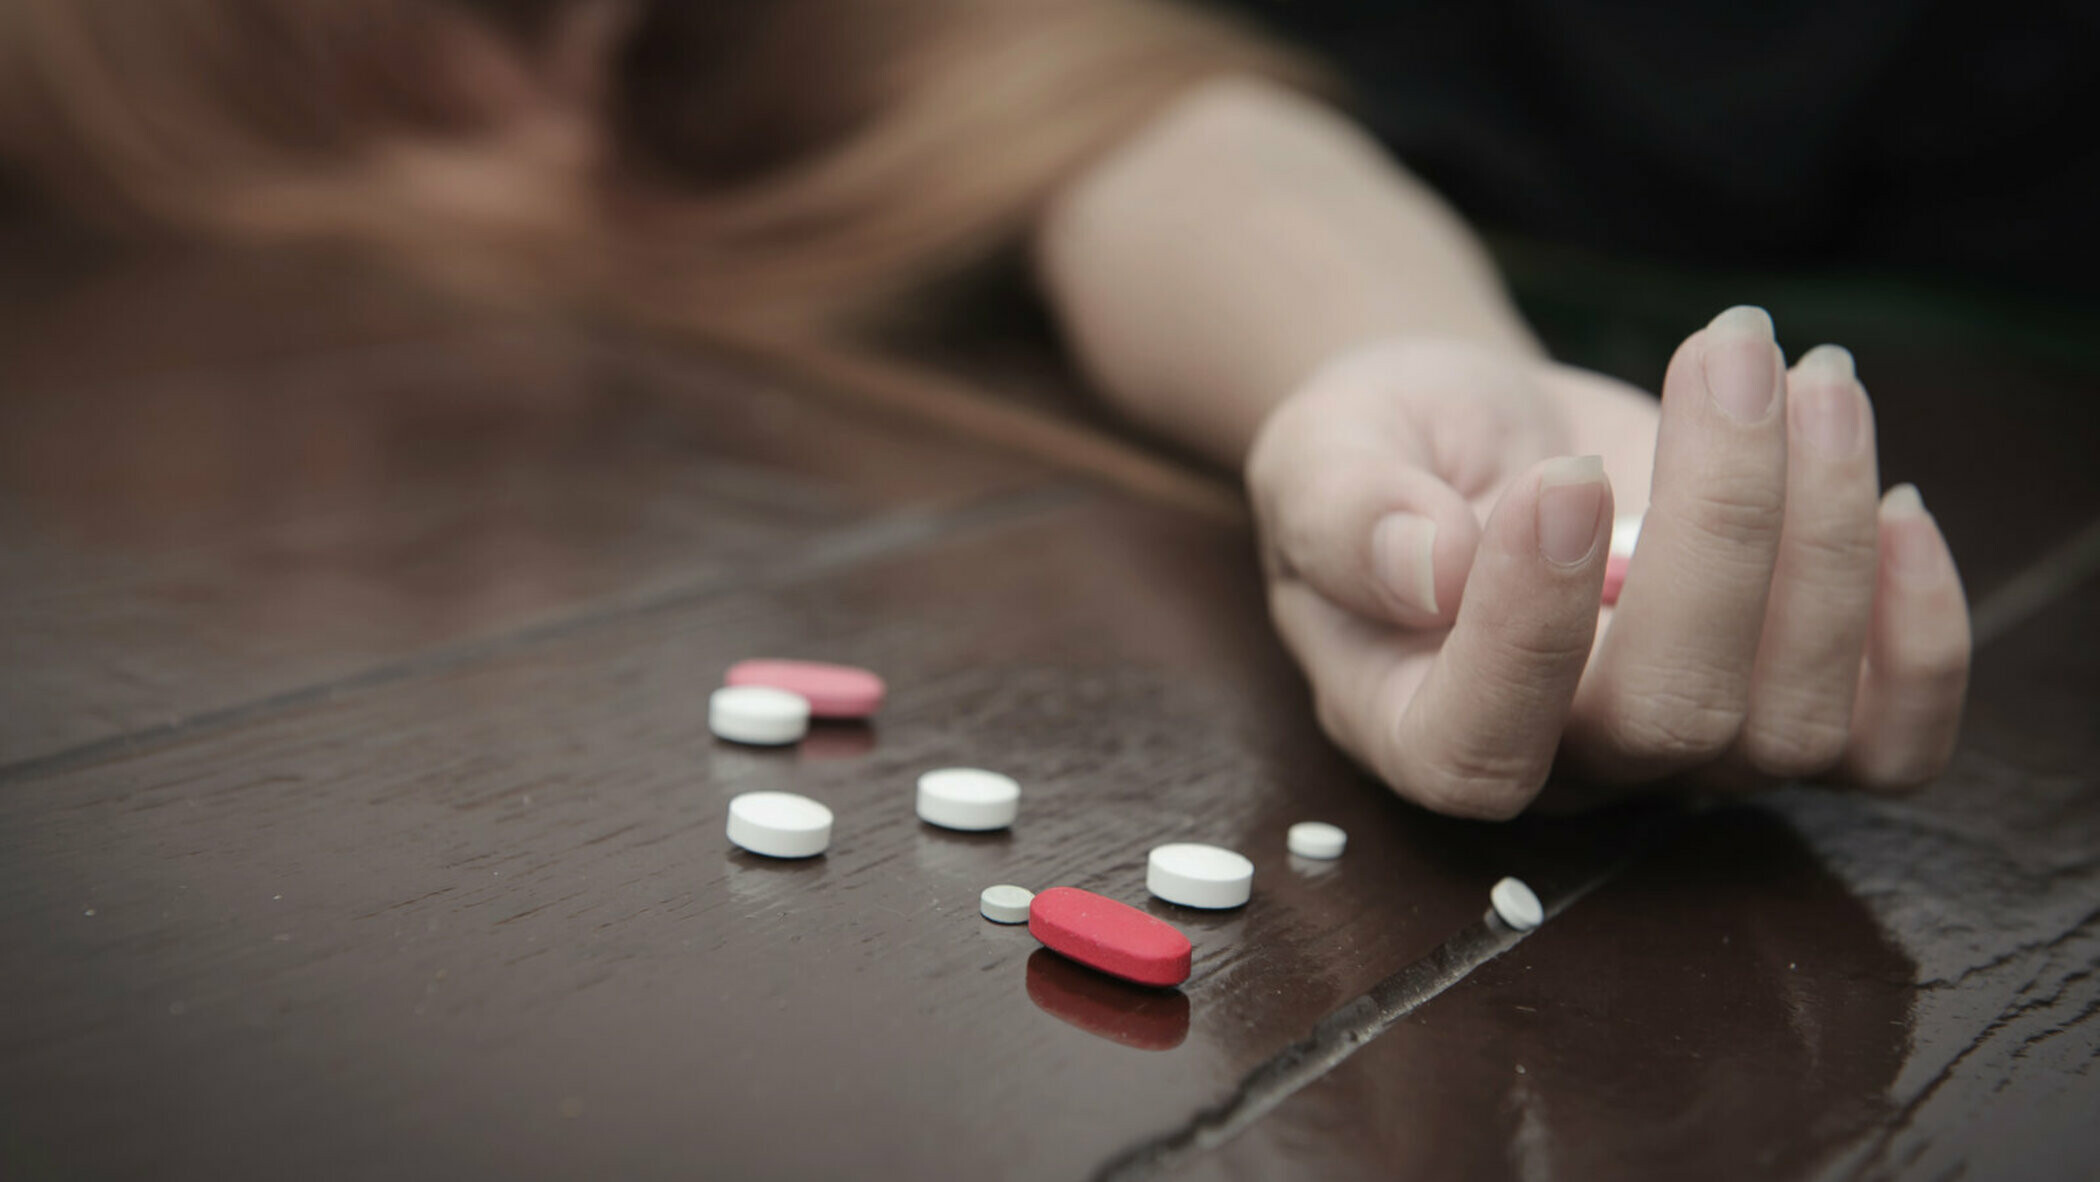 7 things no one tells you about addiction